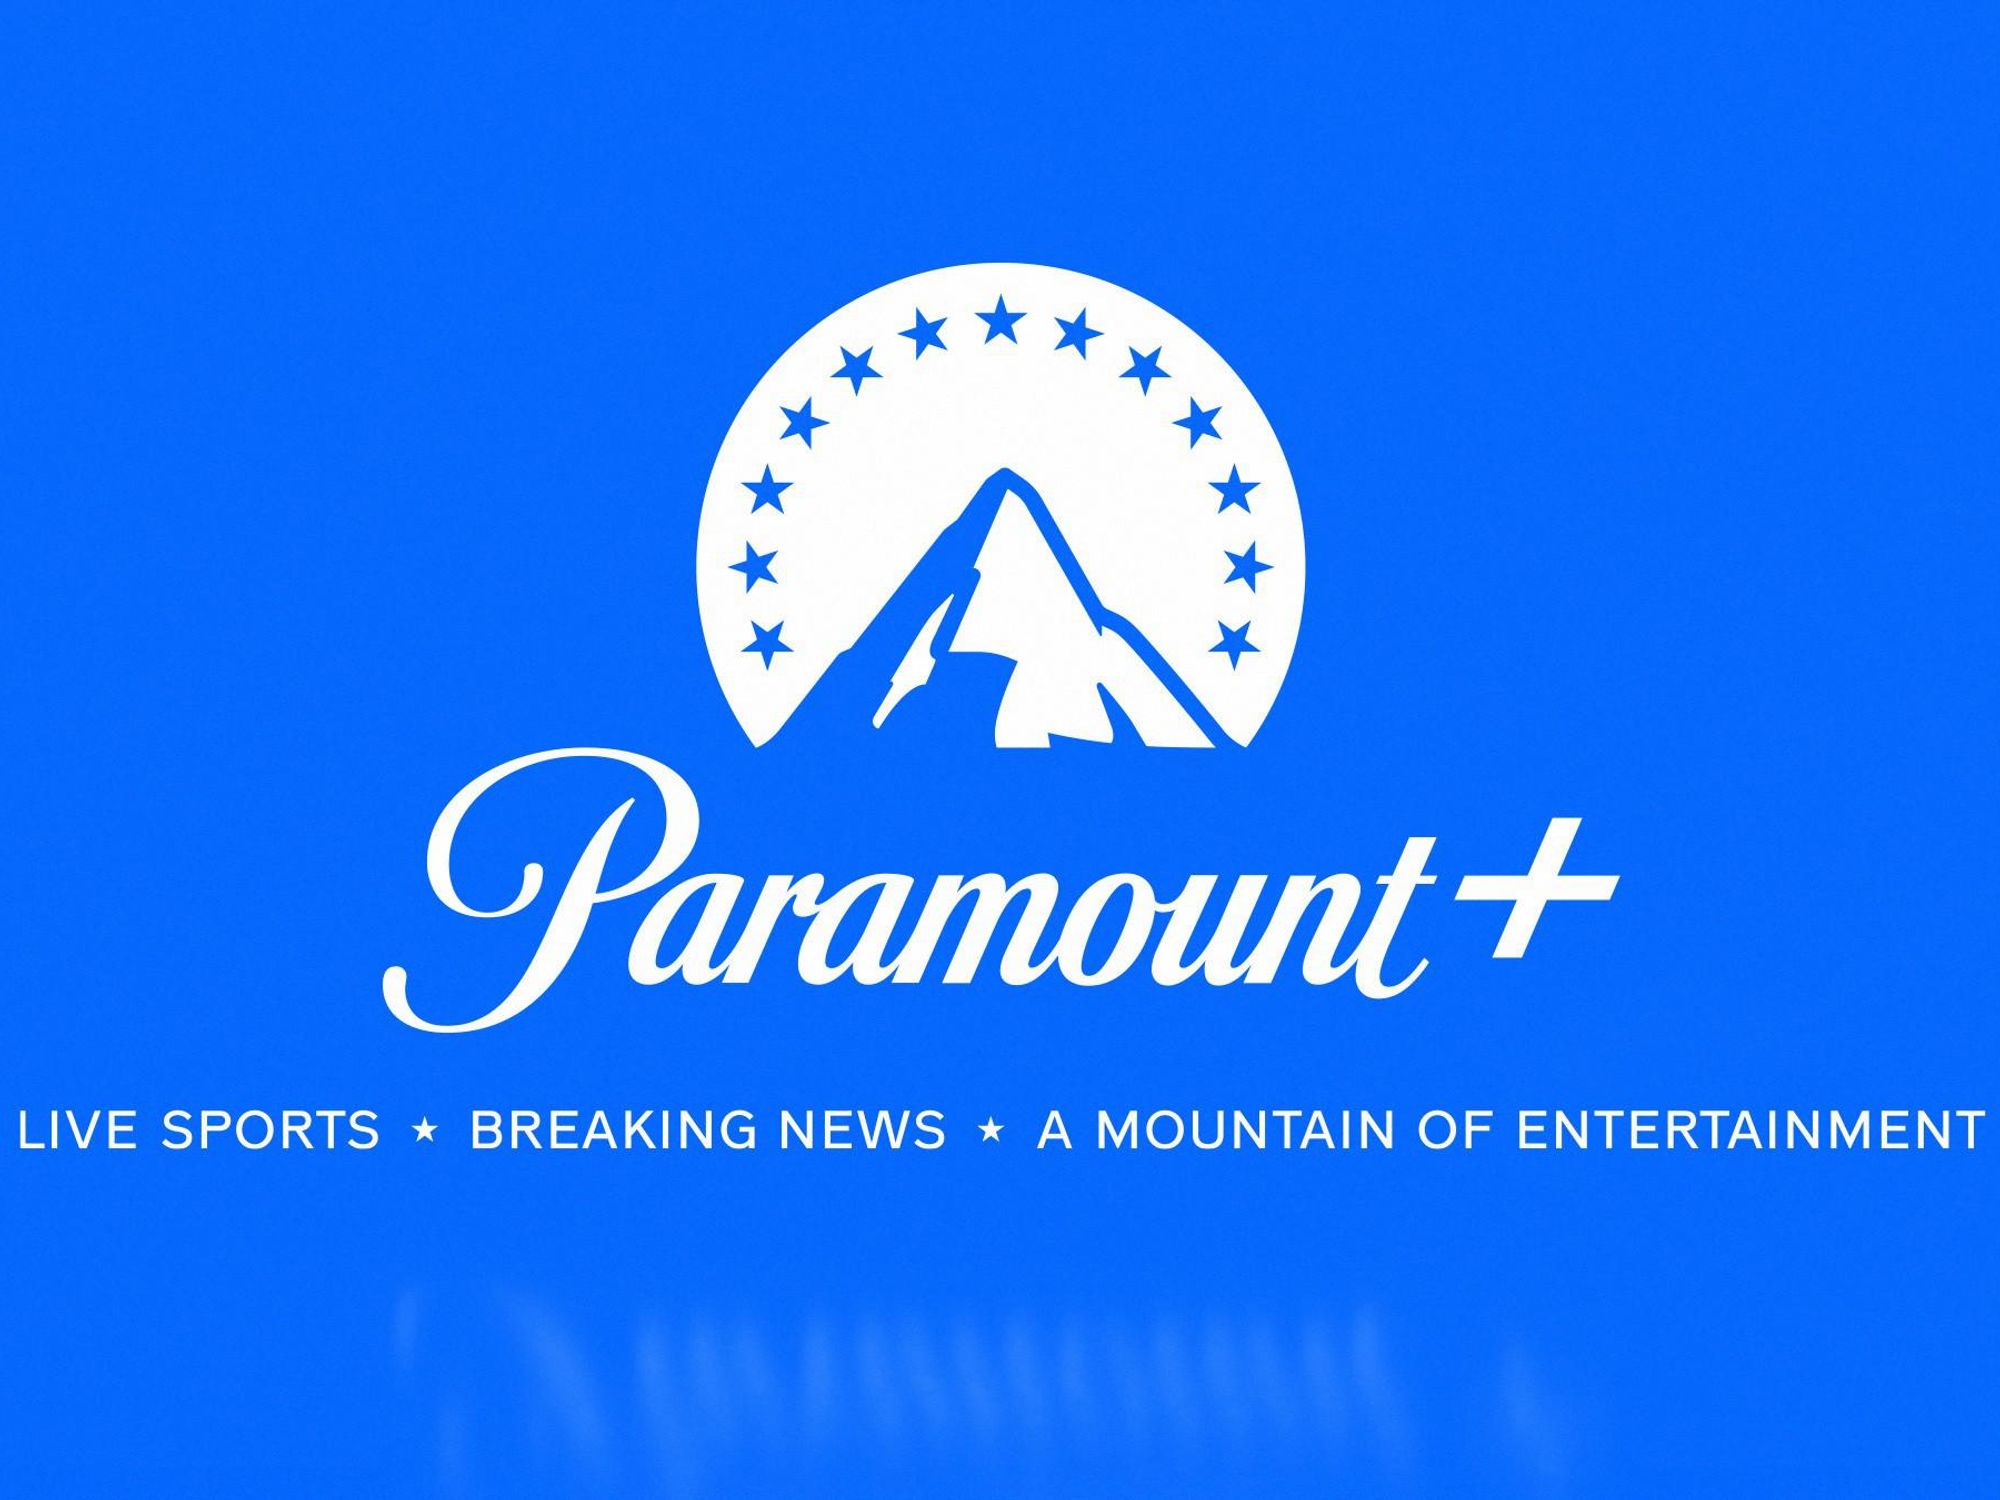 Games People Play - BET - Watch on Paramount Plus